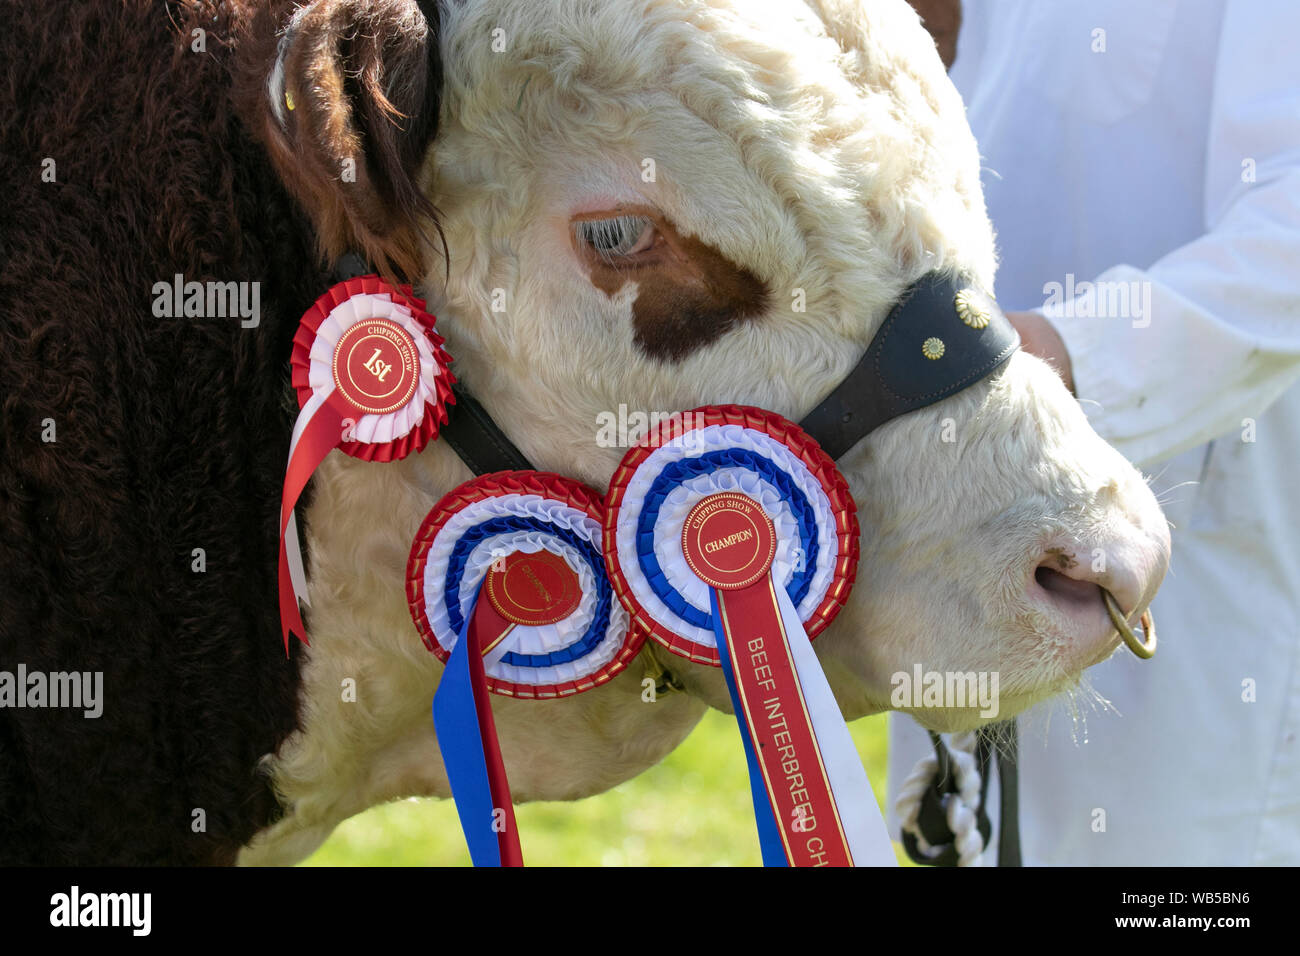 Ayrshire Bulls supreme champion. A breed of taurine beef cattle with winners rosette. animal, award, rosette, ribbon, competition, winner, show, head, harness, purebred, success, badge, win, winner,  Side view head shot of an award winning cattle cow with rosette ribbons. Stock Photo